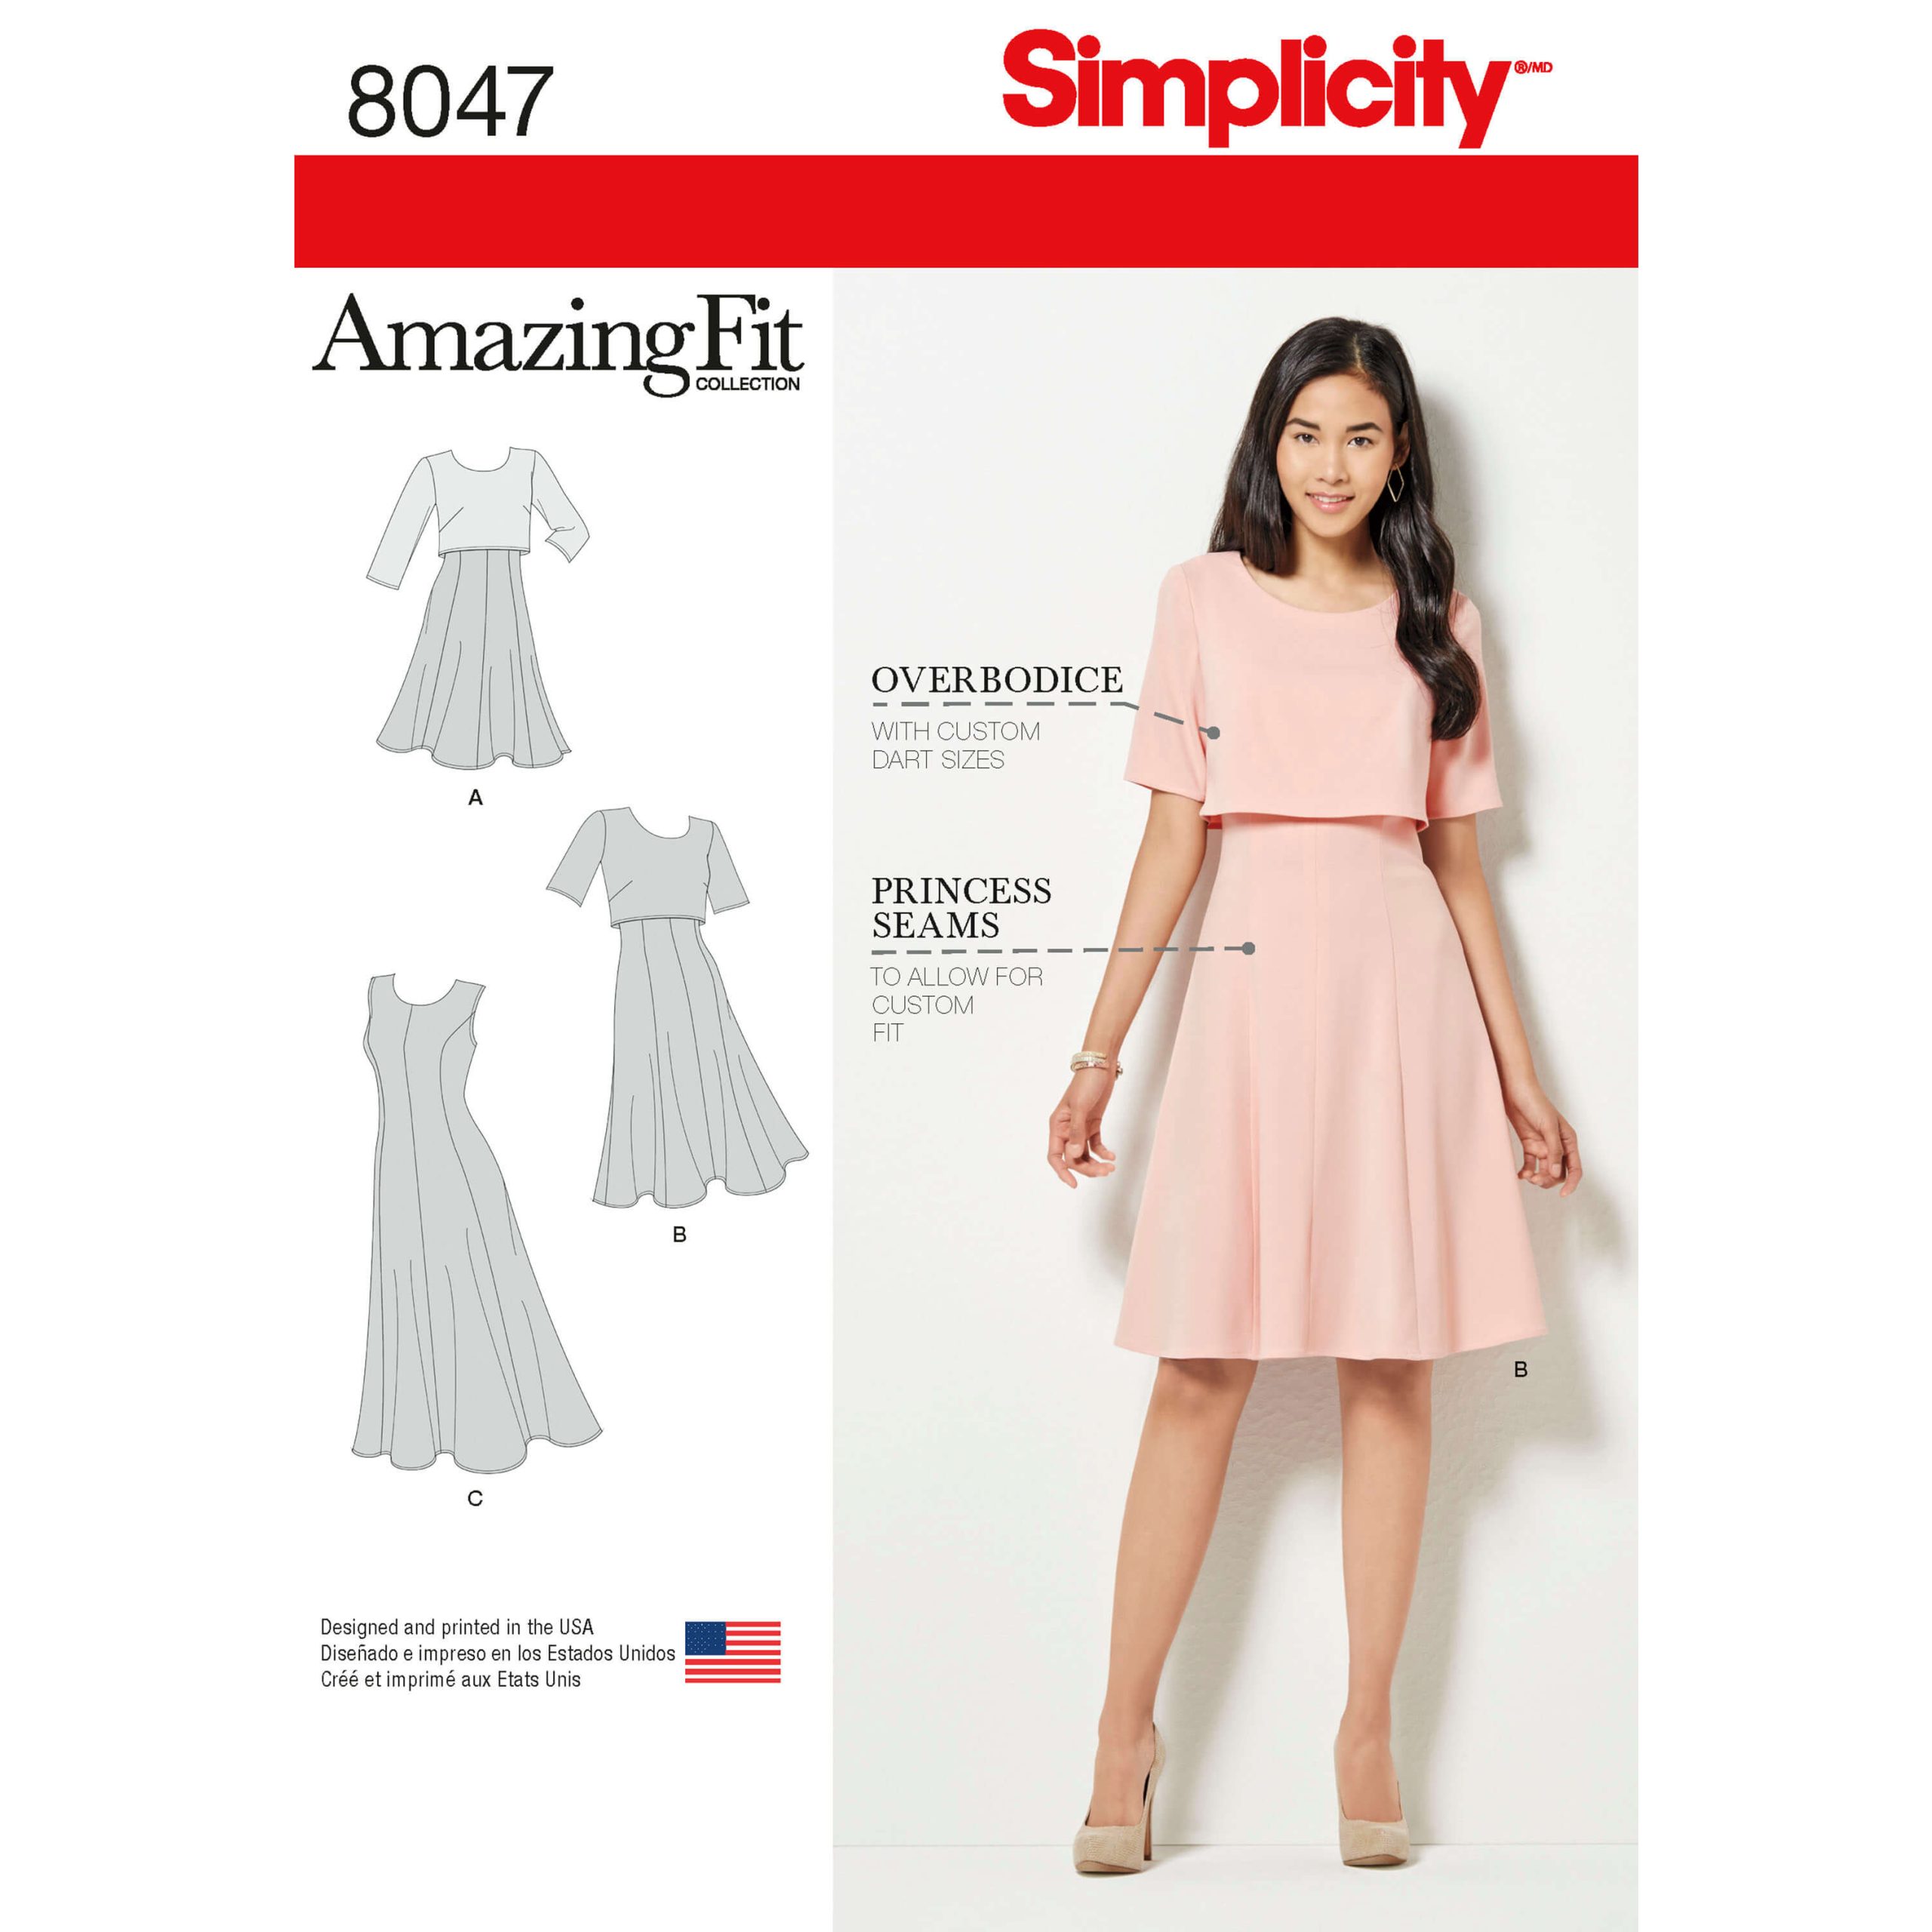 Simplicity Sewing Pattern Amazing Fit 8047 Misses Dress in Slim, Average & Curvy Fit